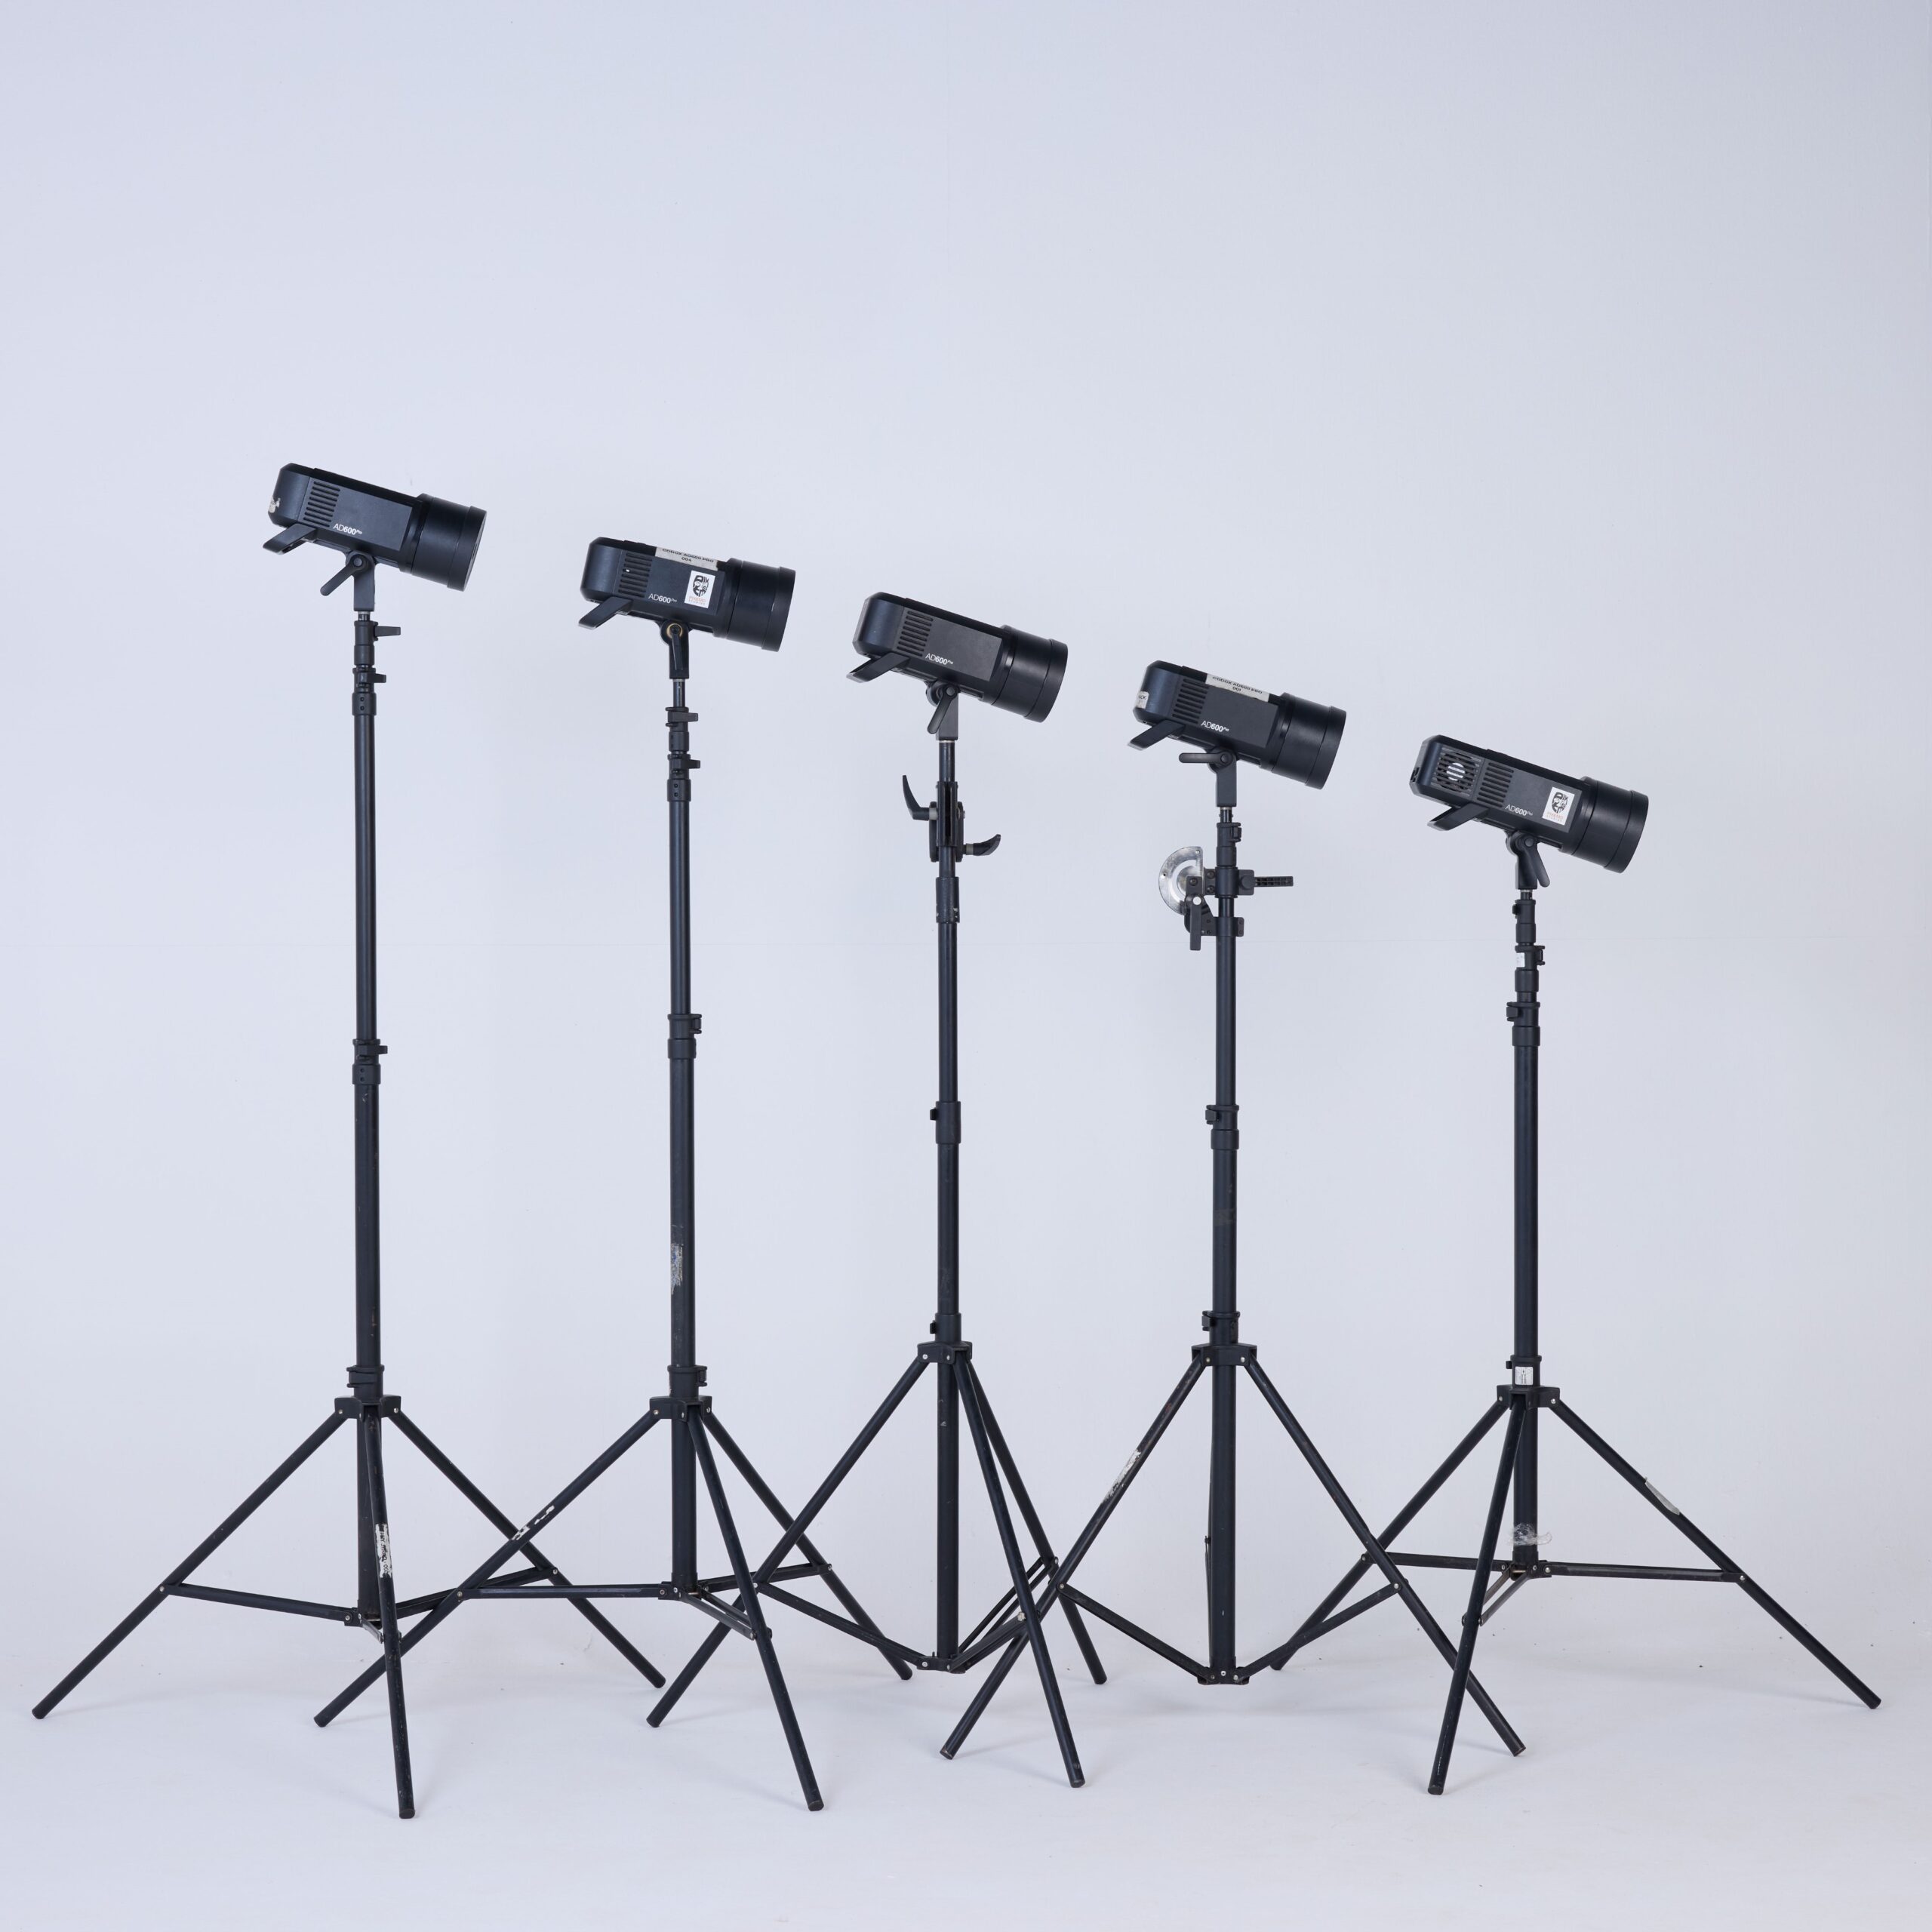 godox-ad600pro-witstro-all-in-one-outdoor-flash